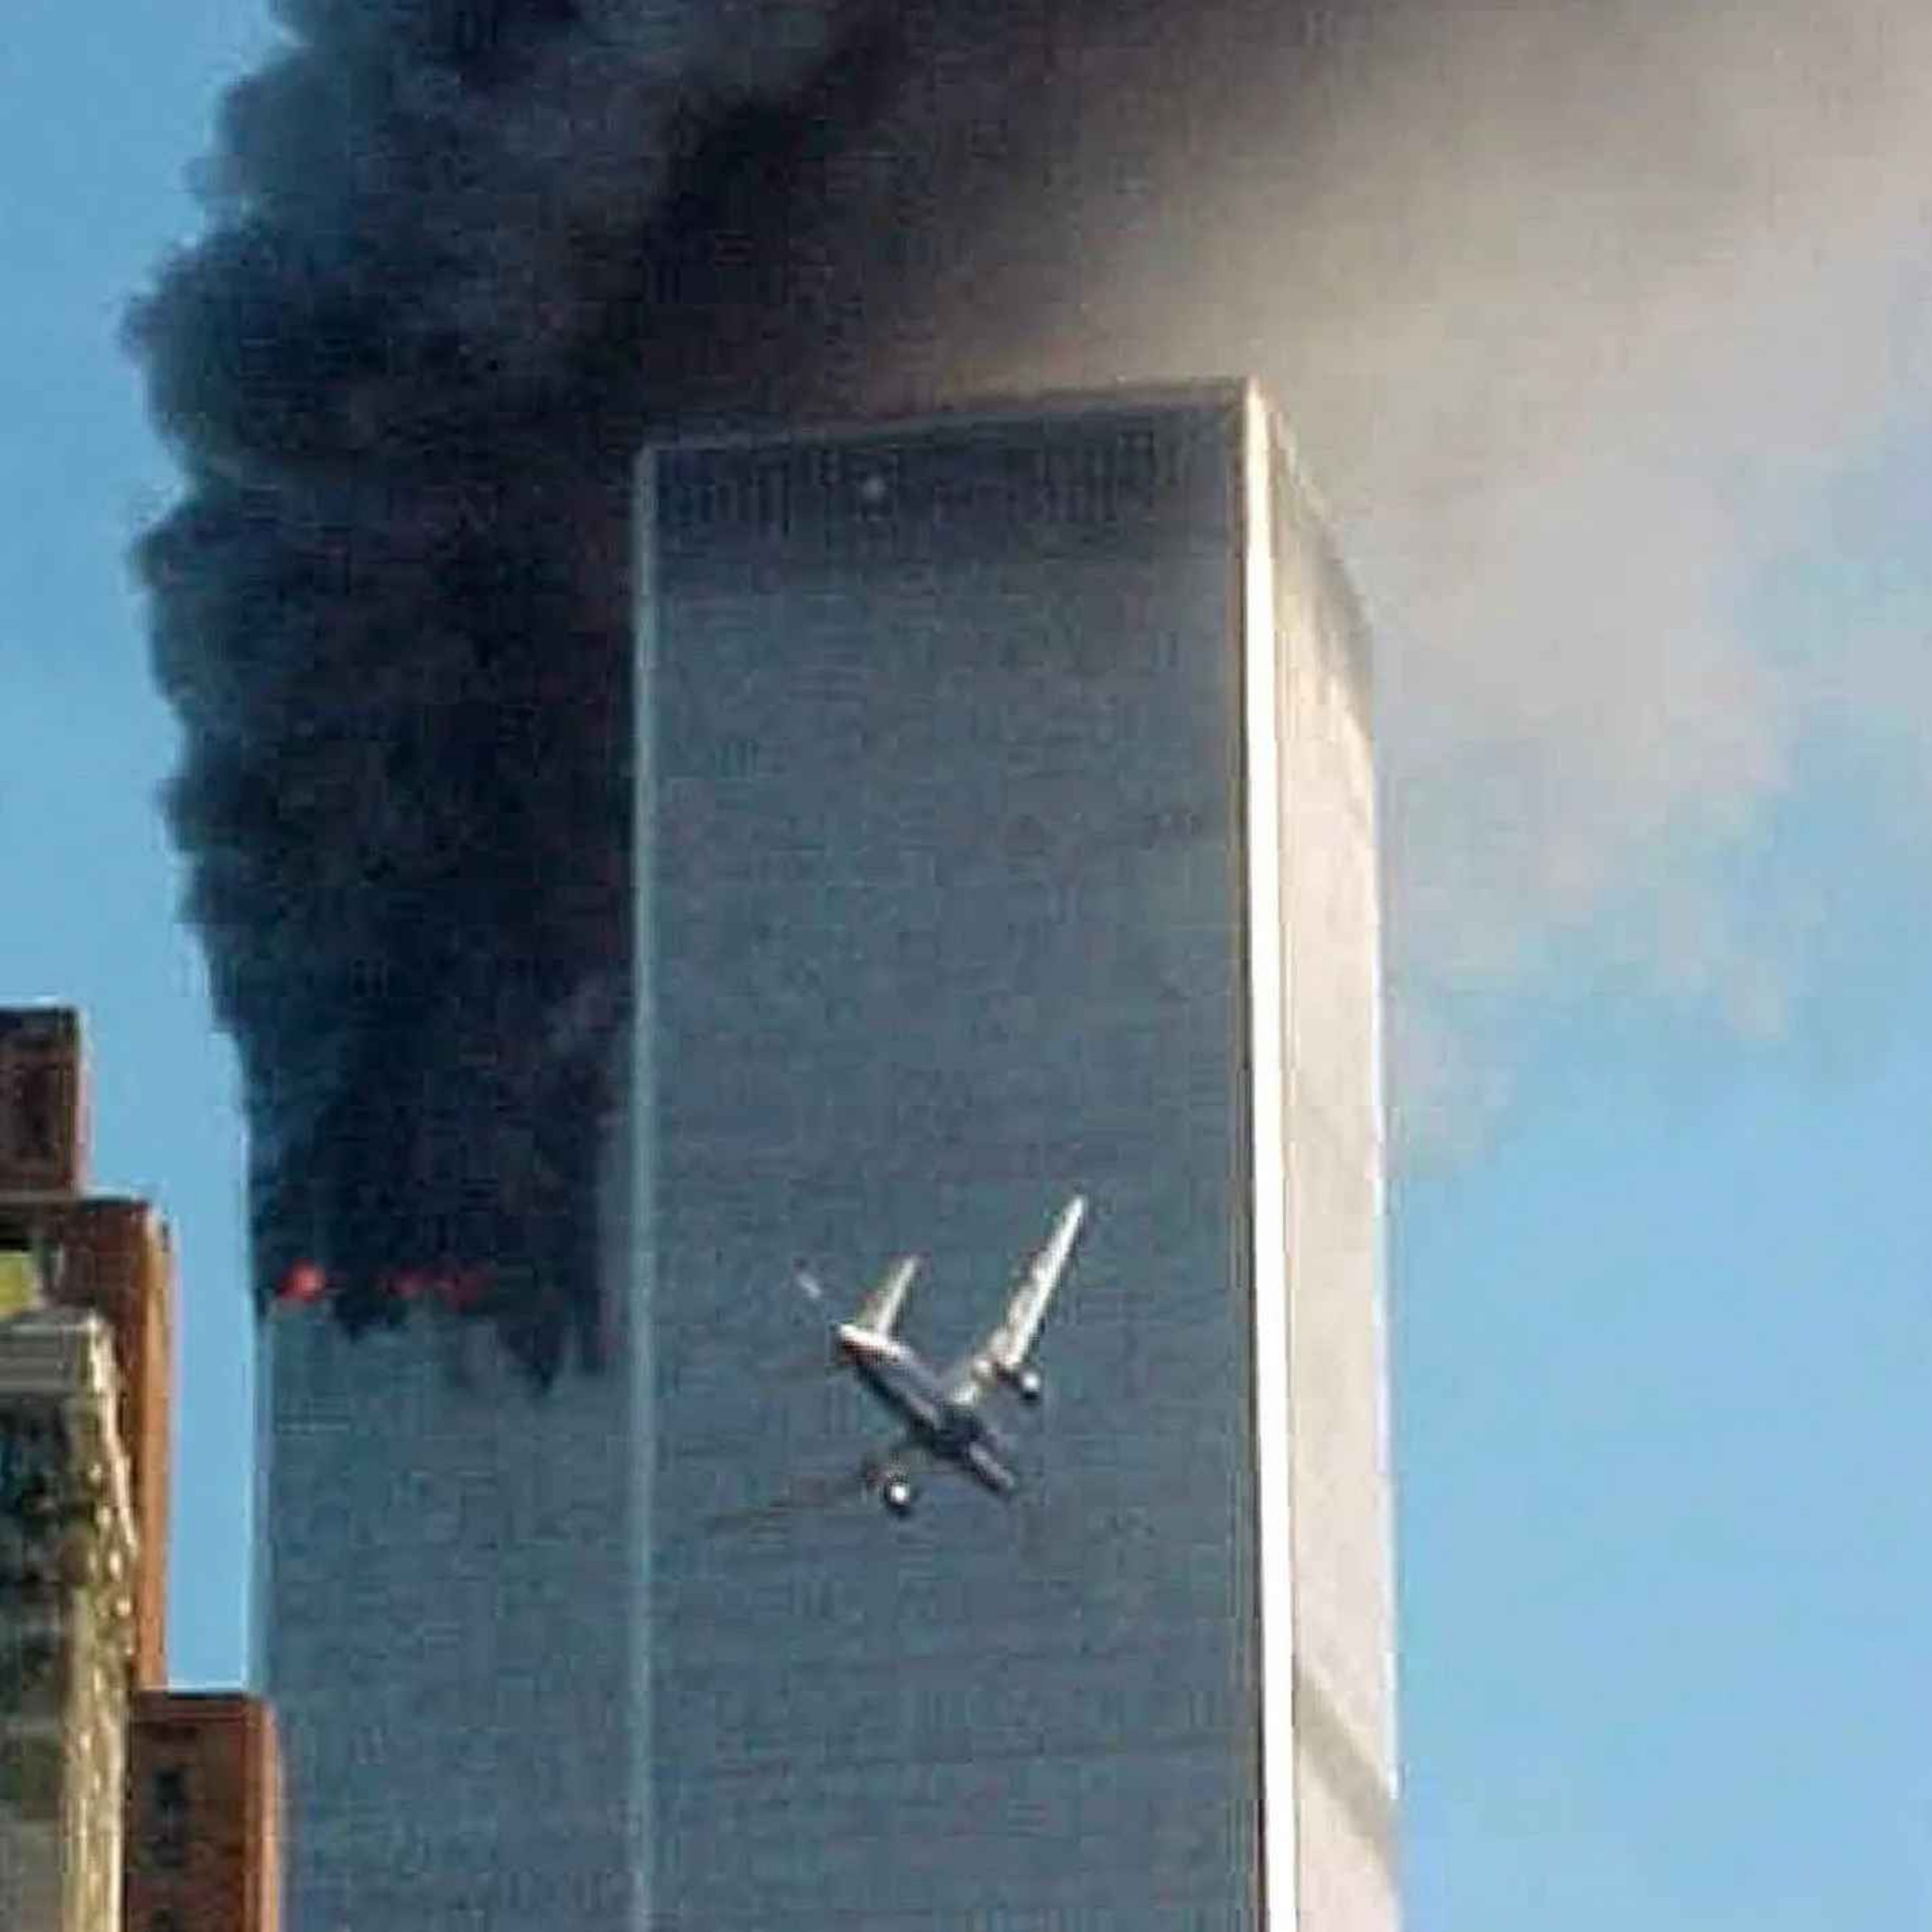 cover art for 9-11 The Day That Shook The World